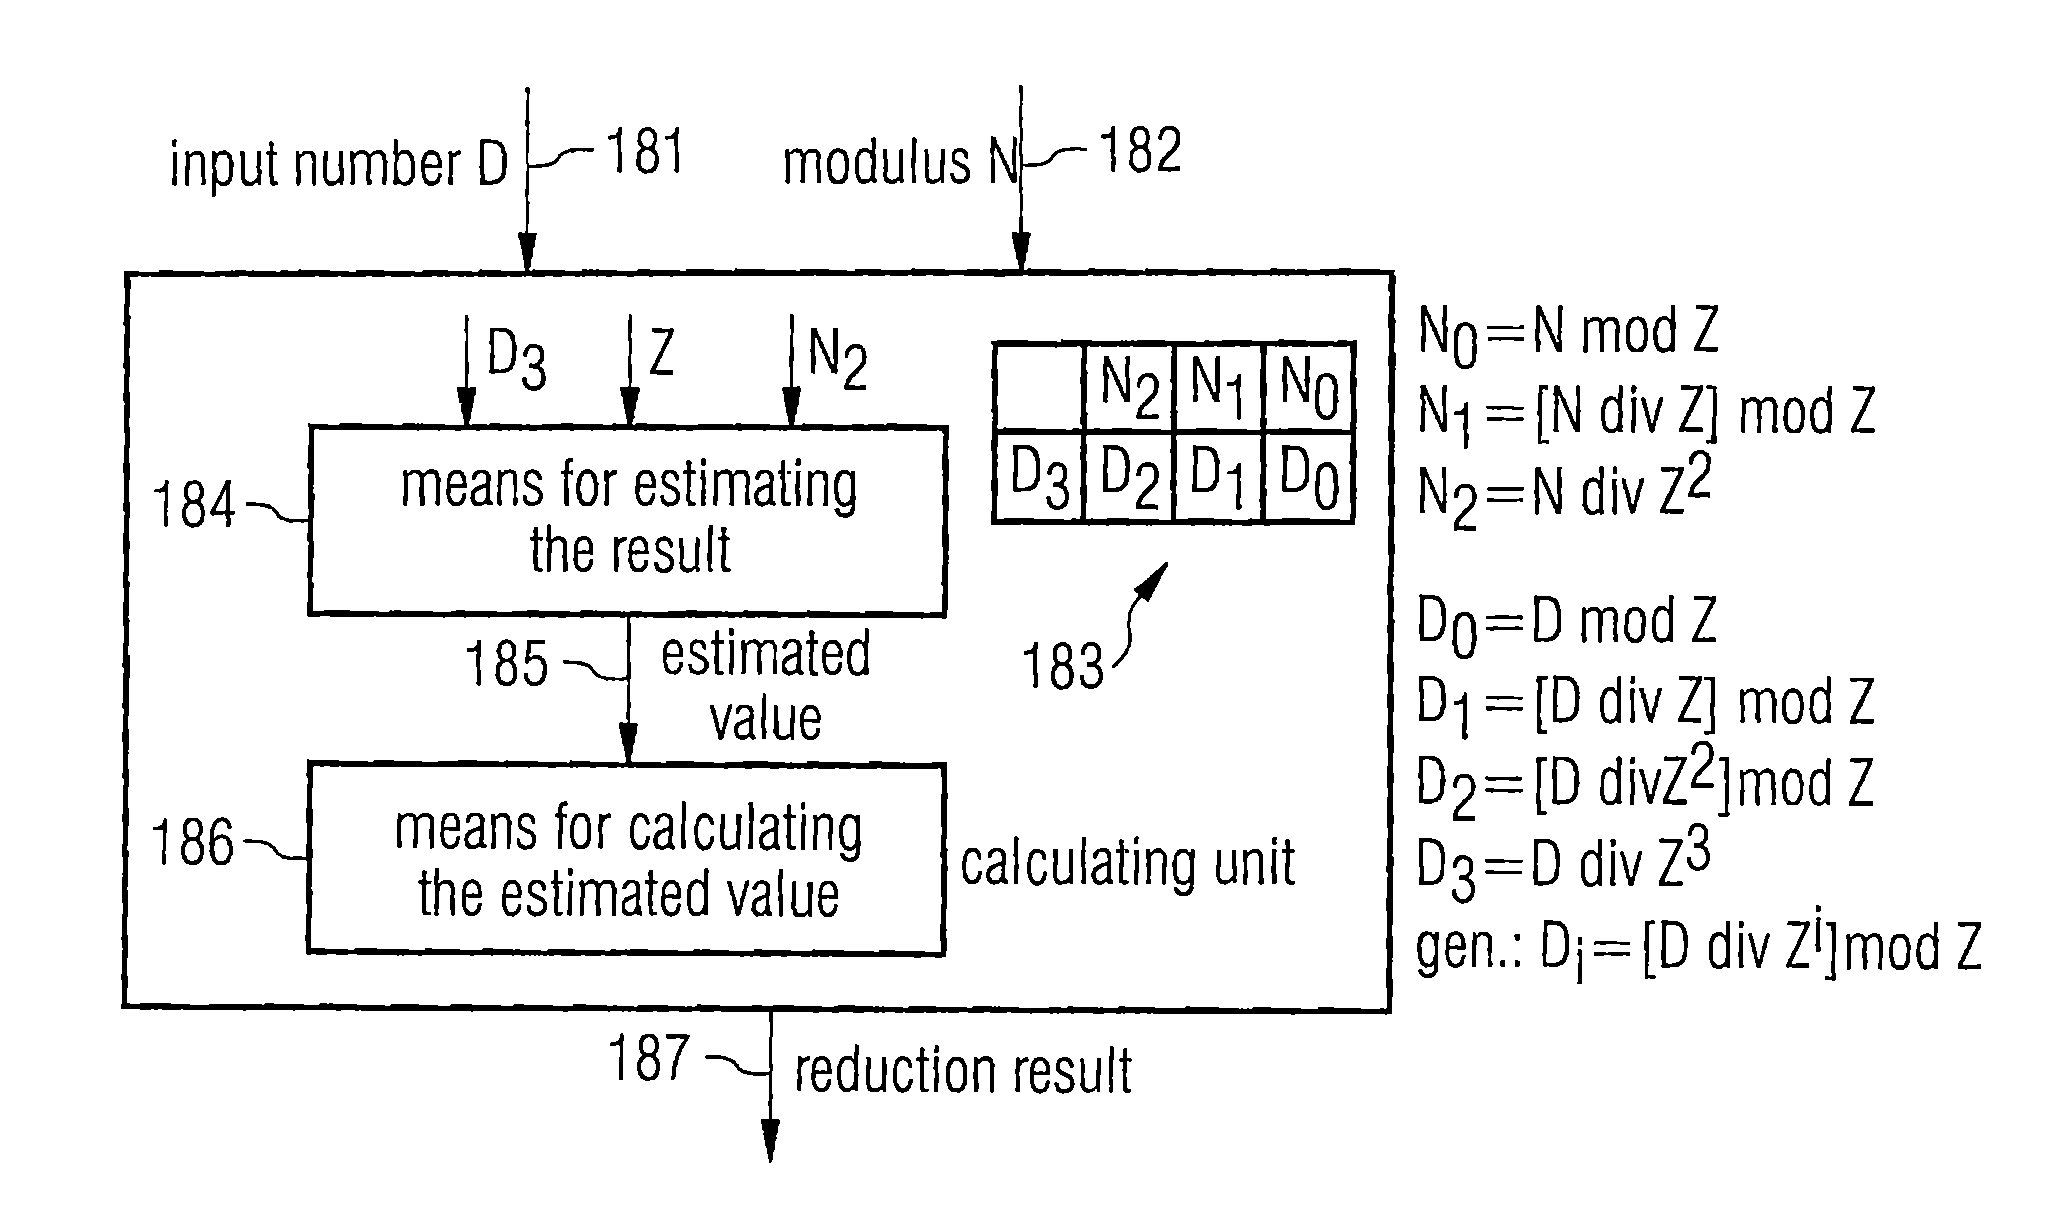 Calculating unit for reducing an input number with respect to a modulus